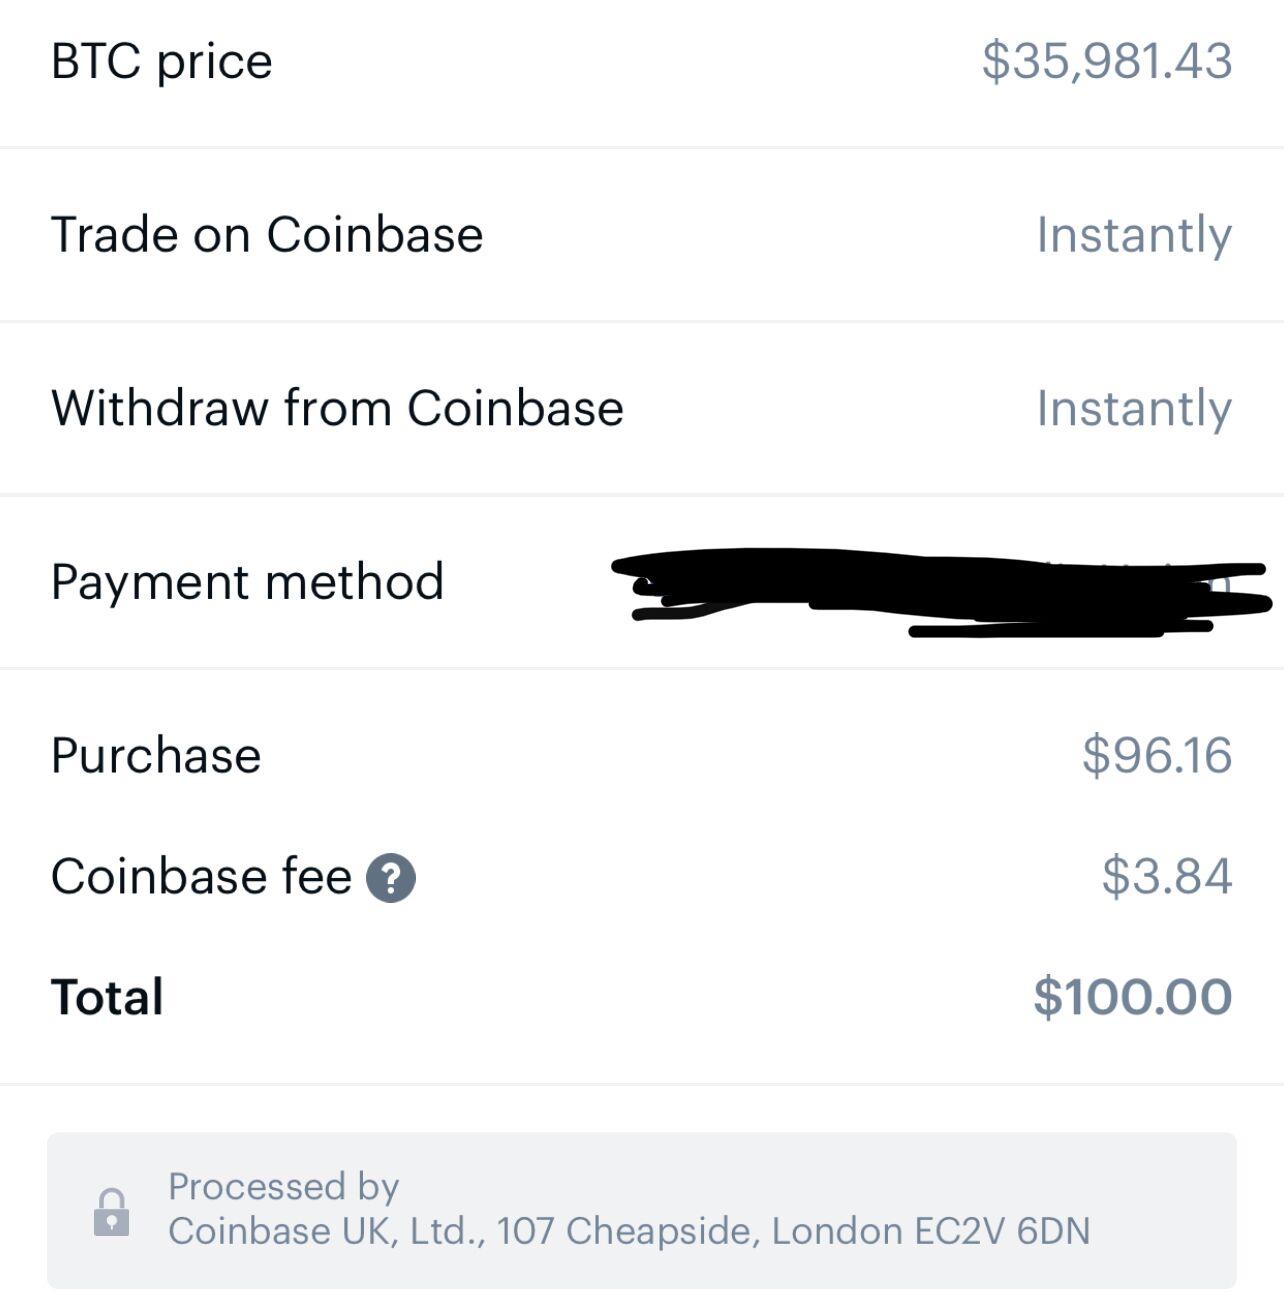 After allegedly draining bank accounts, Coinbase promises refunds (update) - CNET